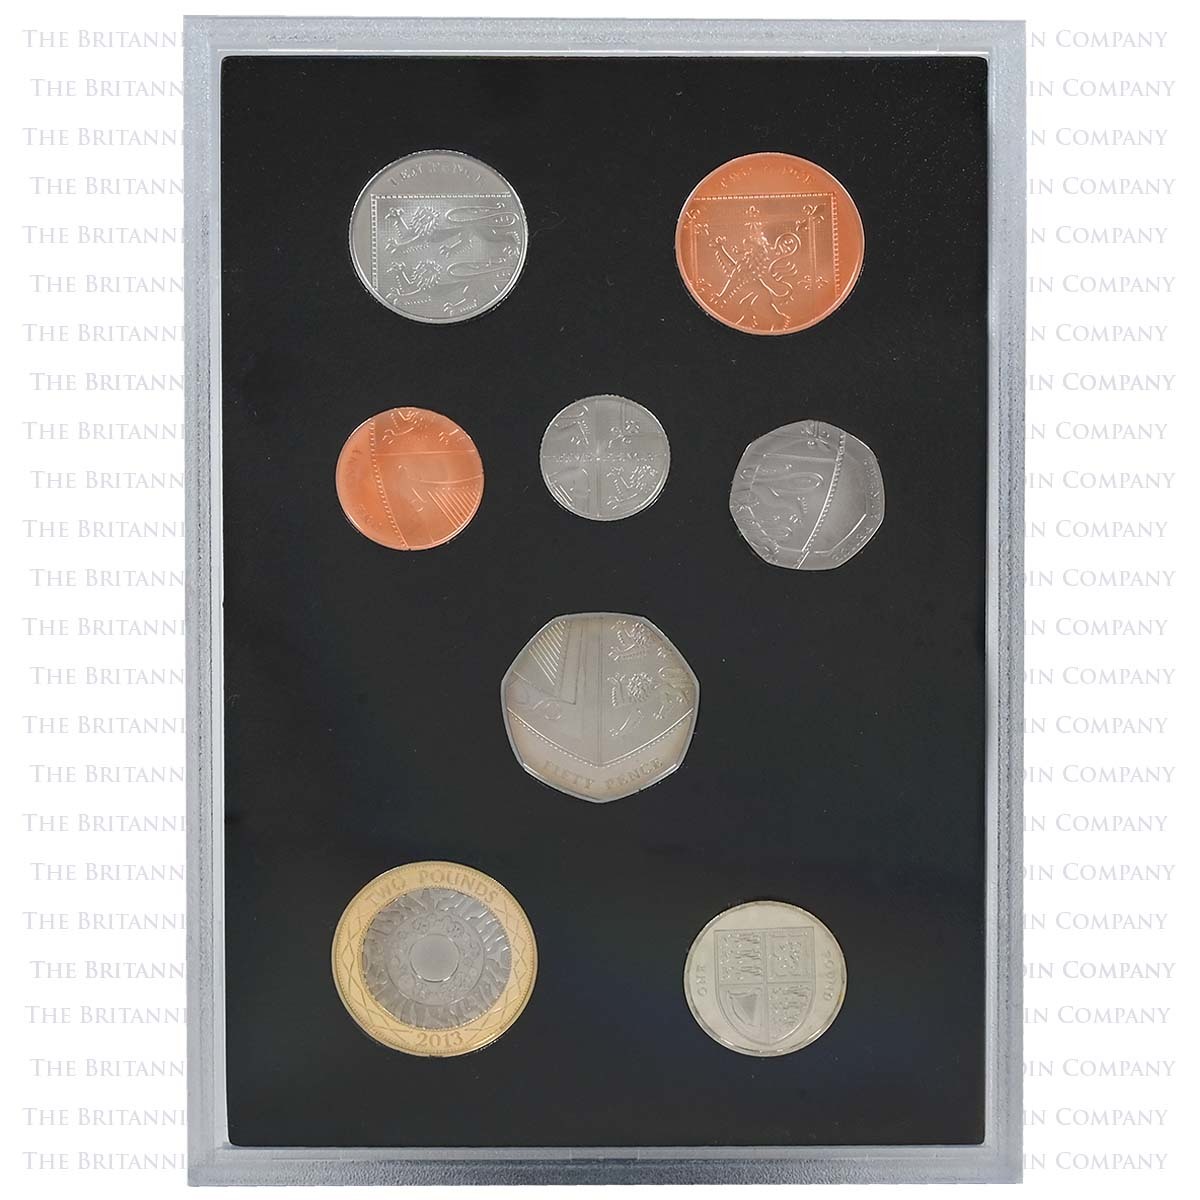 2013-proof-coin-set-collector-edtition-002-m